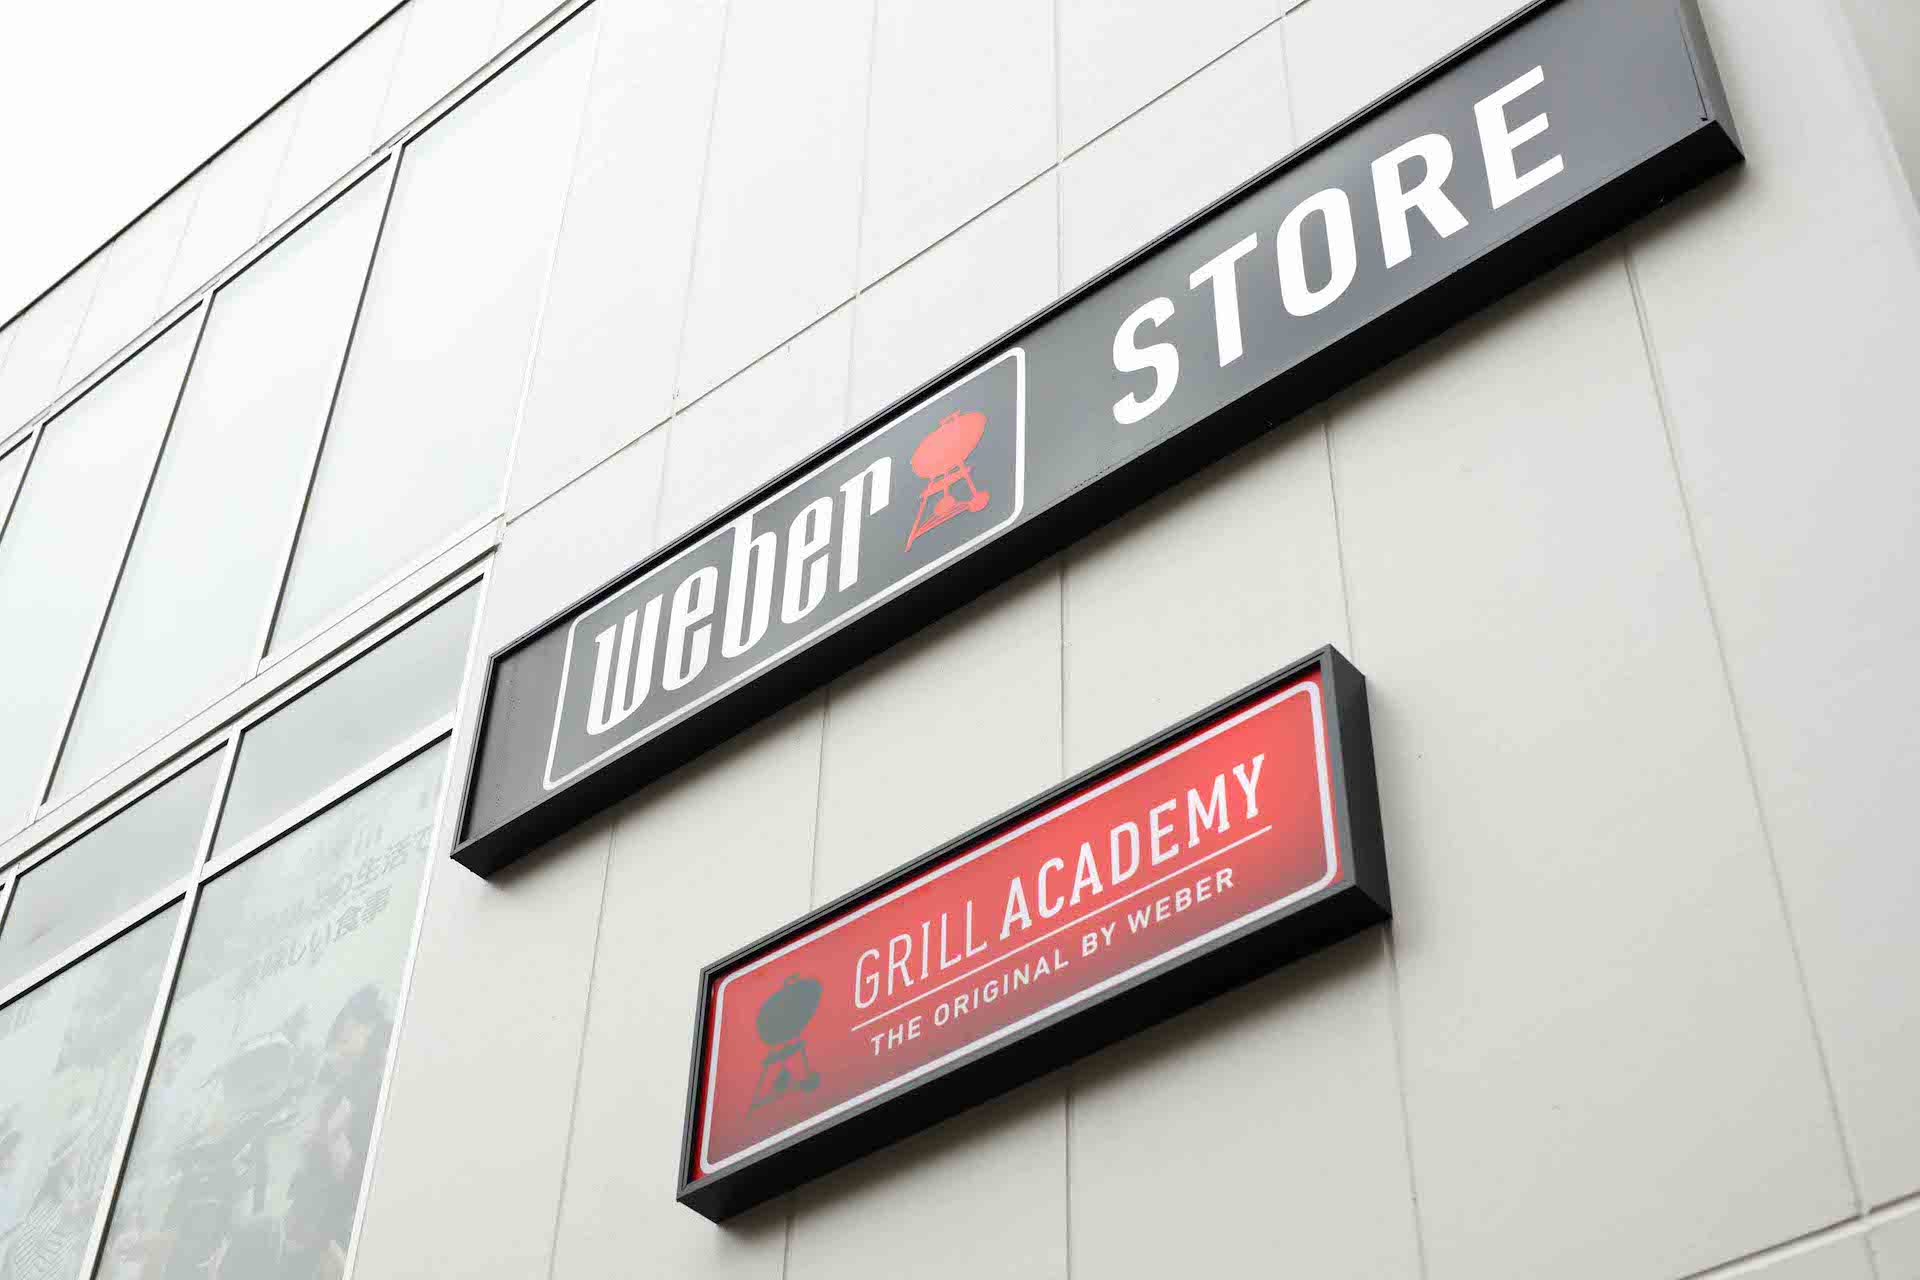 Grill Academy location image 1